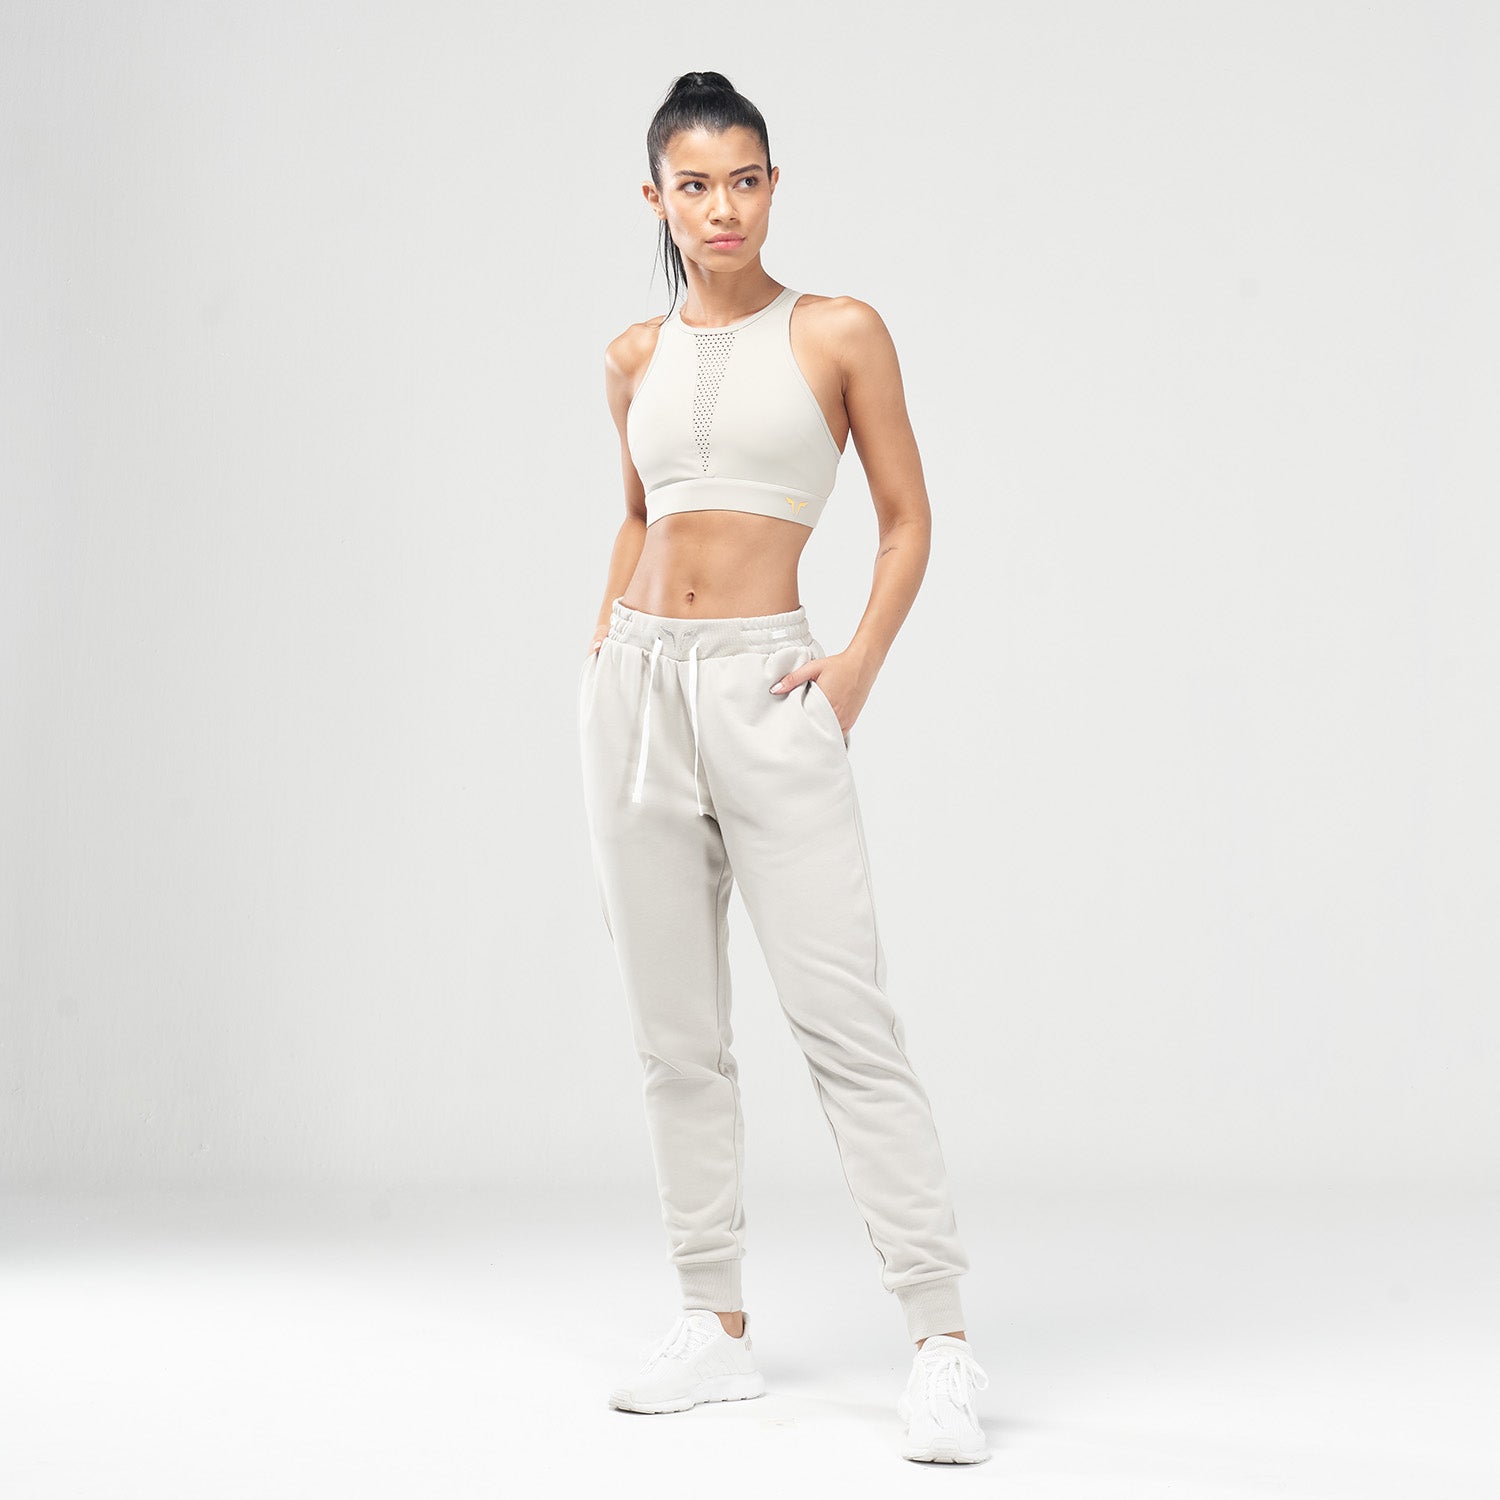 squatwolf-workout-clothes-code-relaxed-joggers-grey-gym-pants-for-women